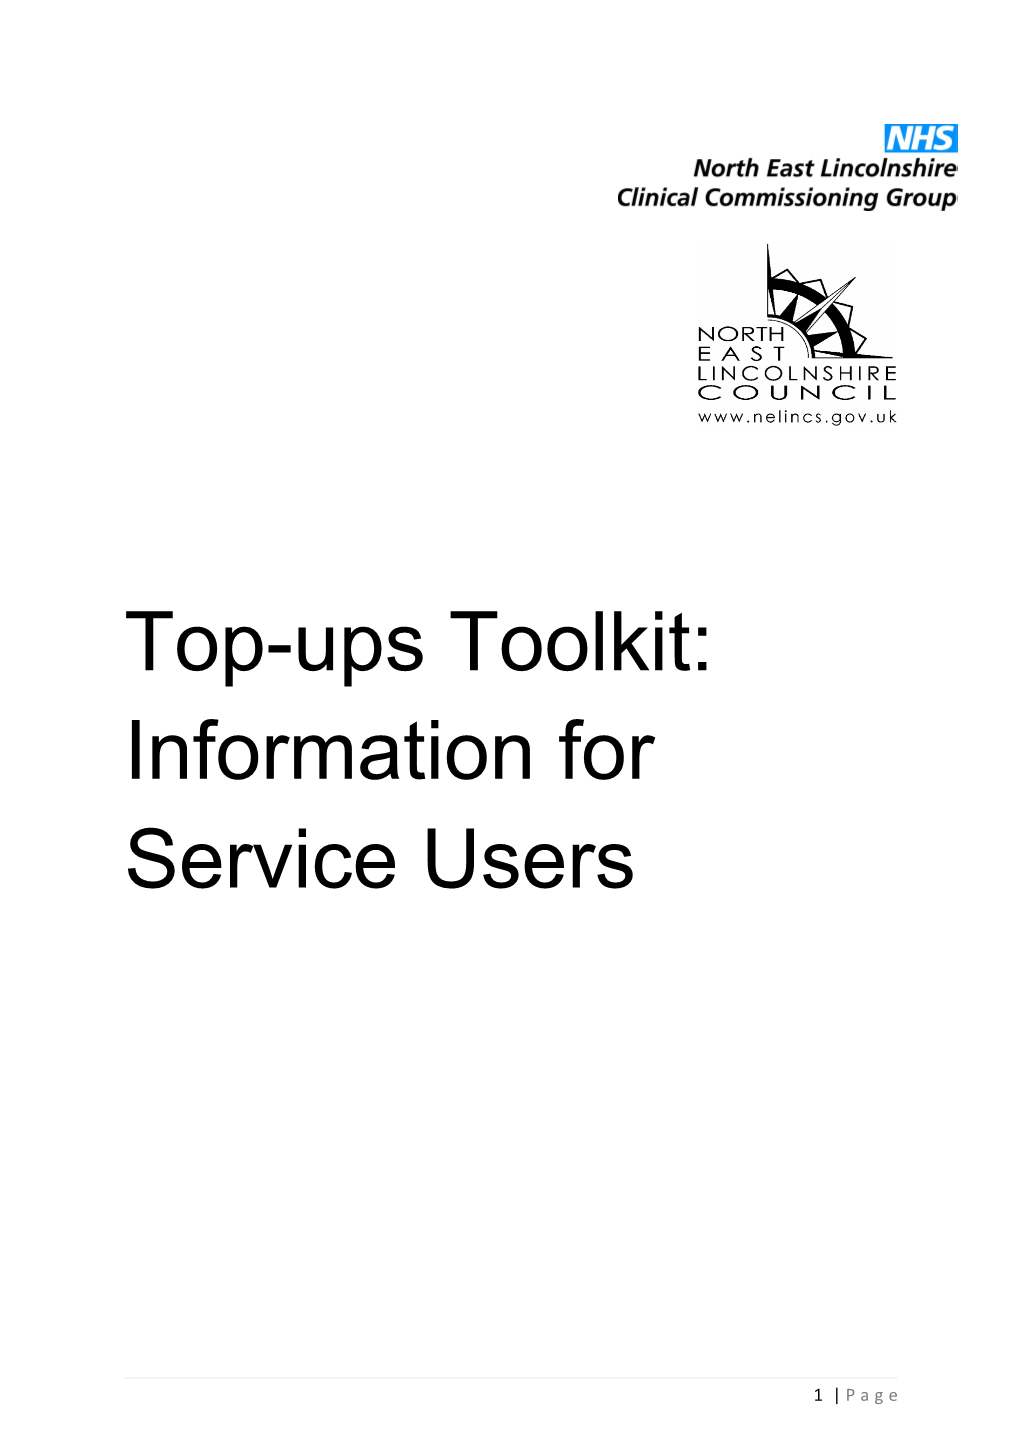 Top-Ups Toolkit: Information for Service Users